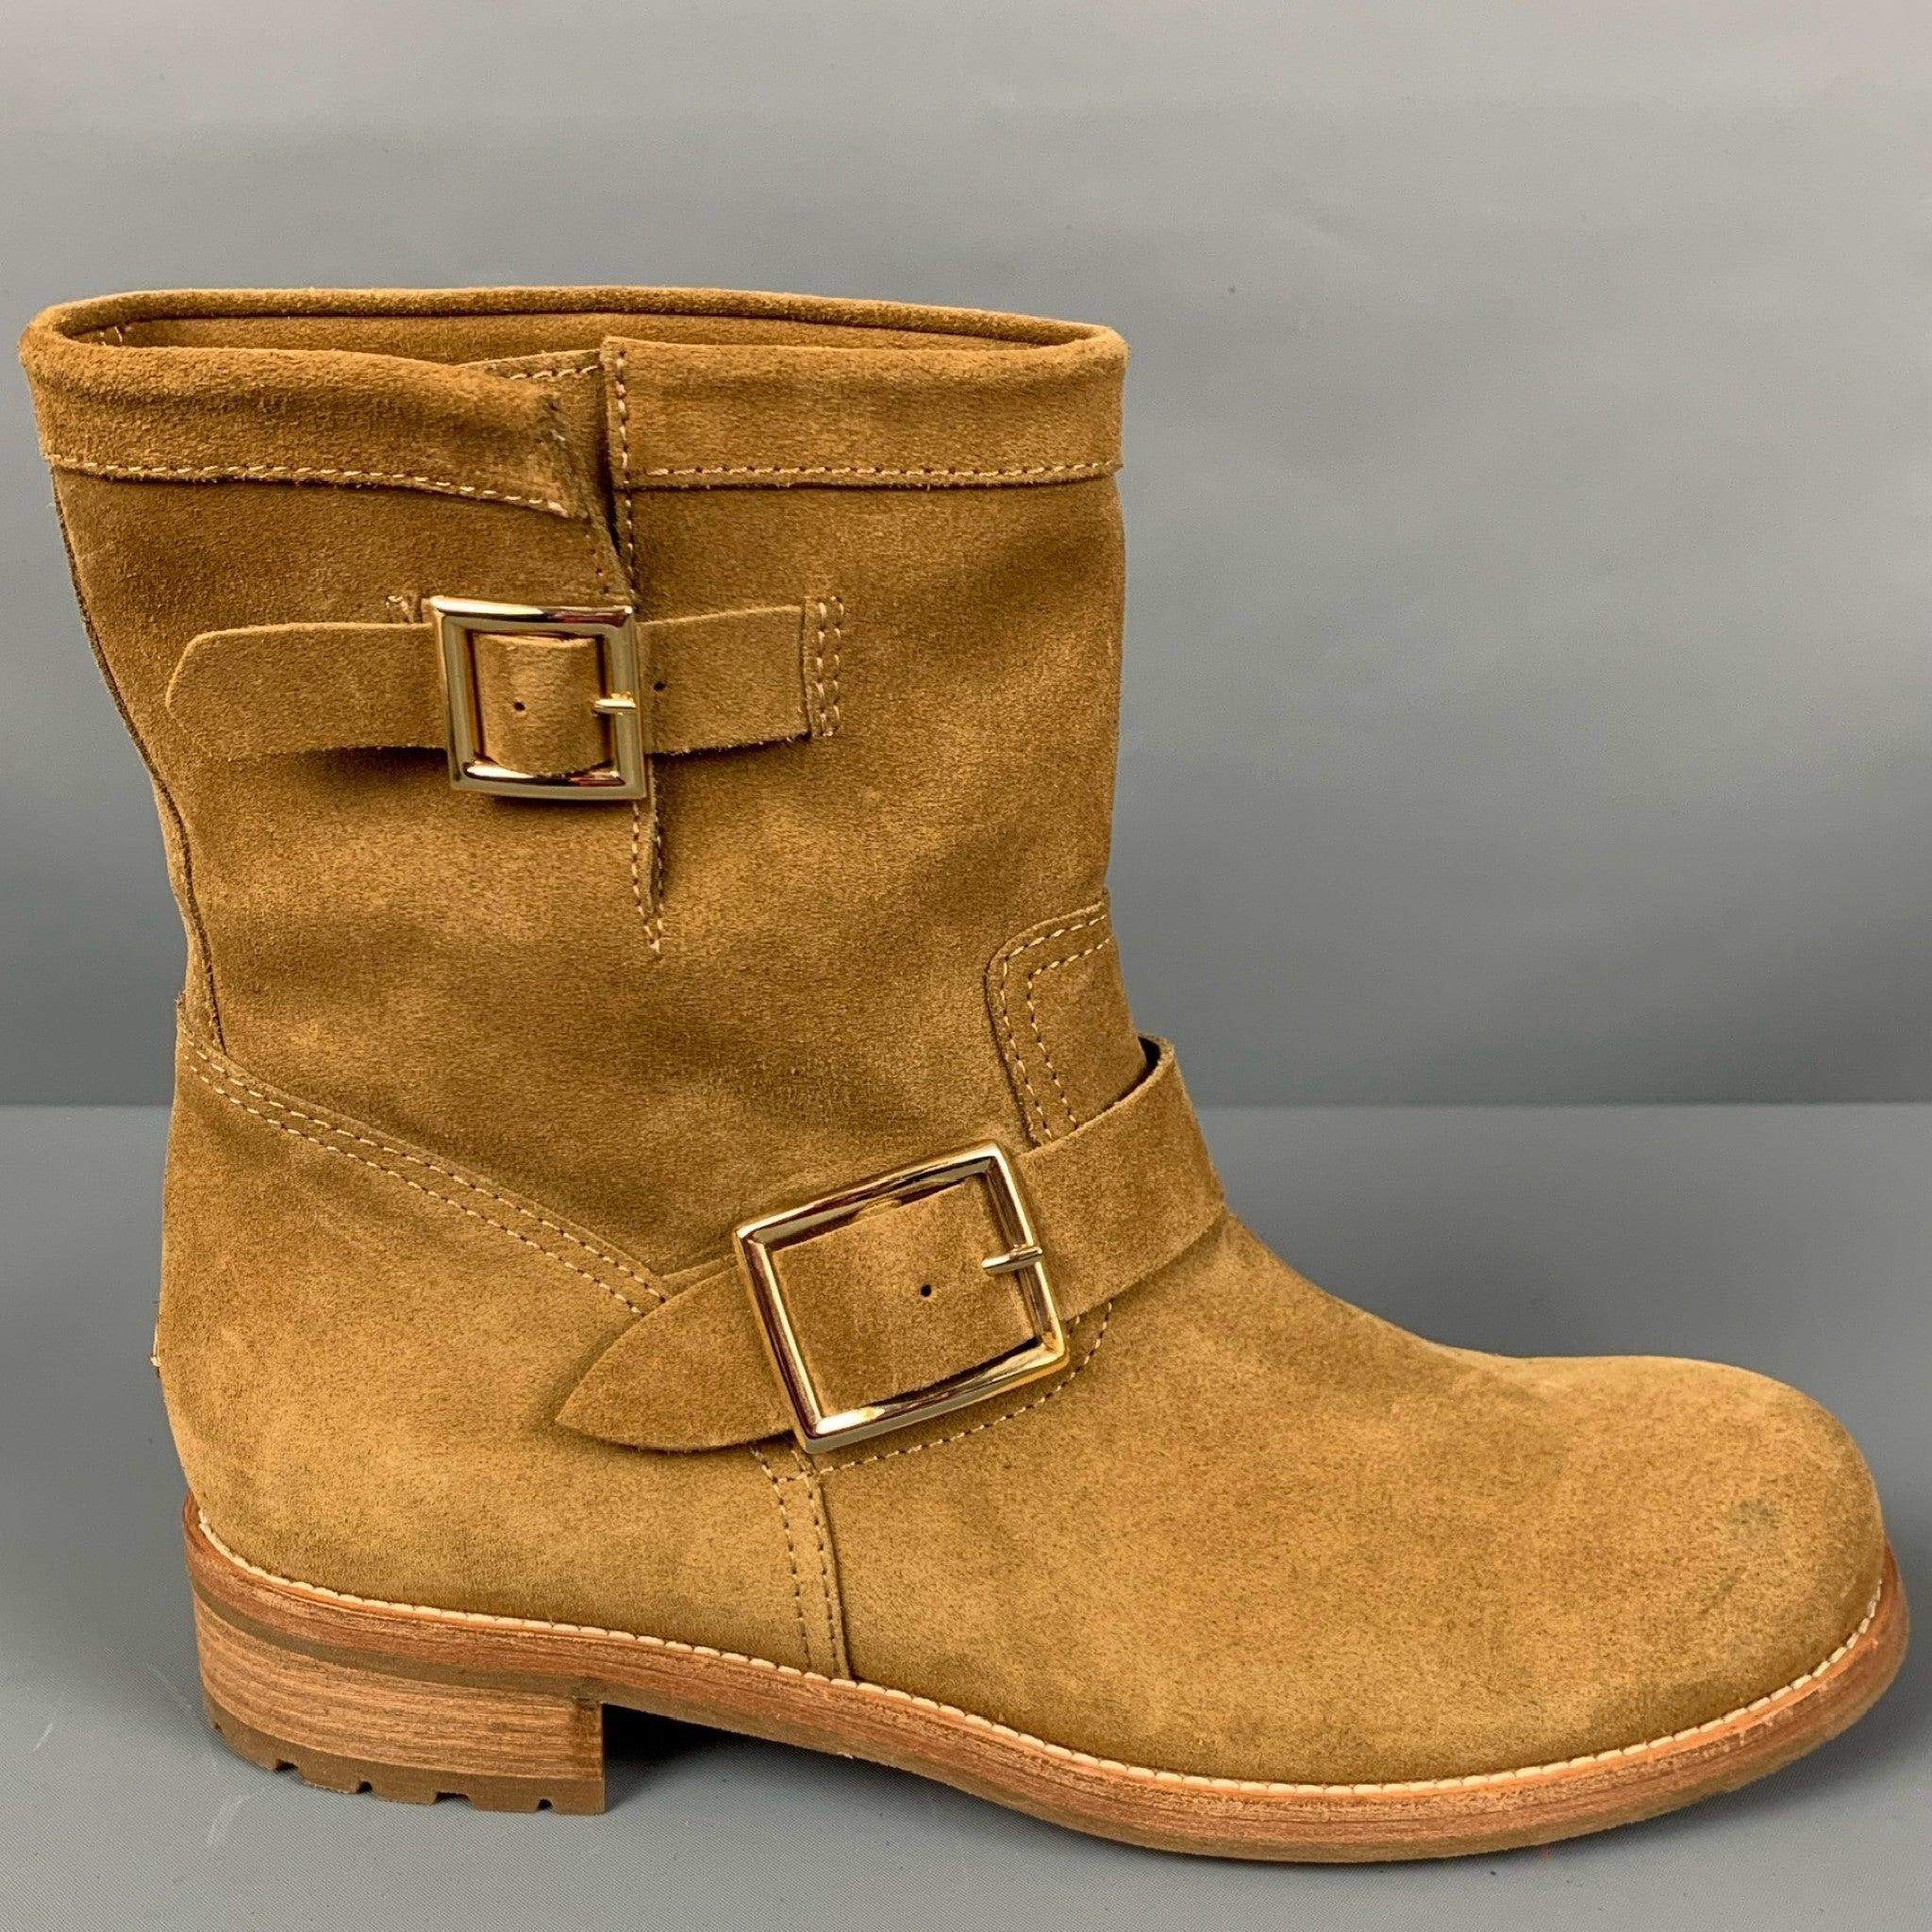 JIMMY CHOO
boots in a camel suede featuring a pull on style, gold tone hardware, and double buckle. Made in Italy.New without Box. 

Marked:   40.5 

Measurements: 
  Length: 10.75 inches Width: 3.75 inches Height: 8.5 inches 
  
  
 
Reference: